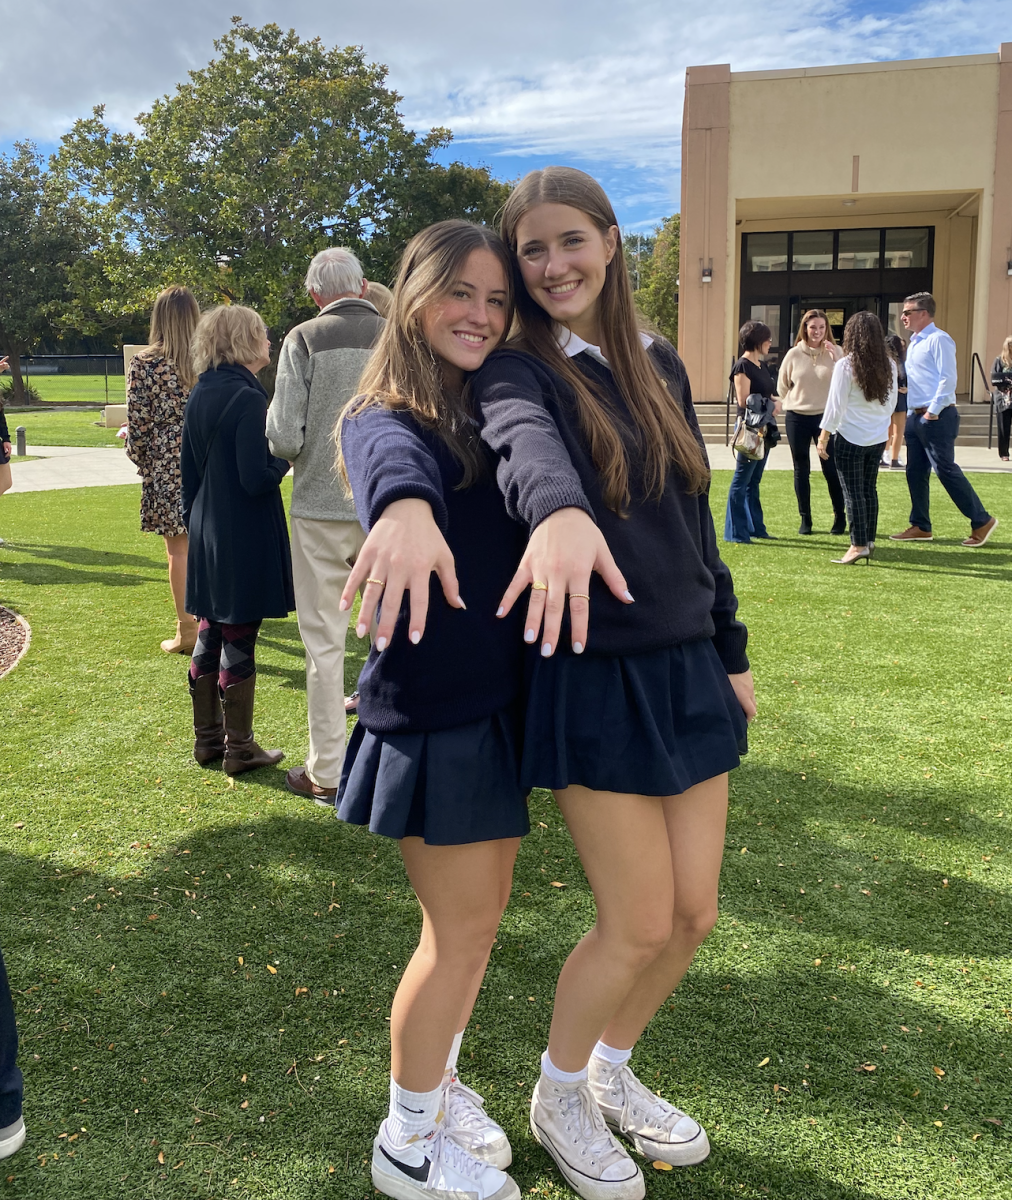 Juniors+Ava+Baldi+and+Tessa+Turiello+show+off+their+newly+blessed+rings.